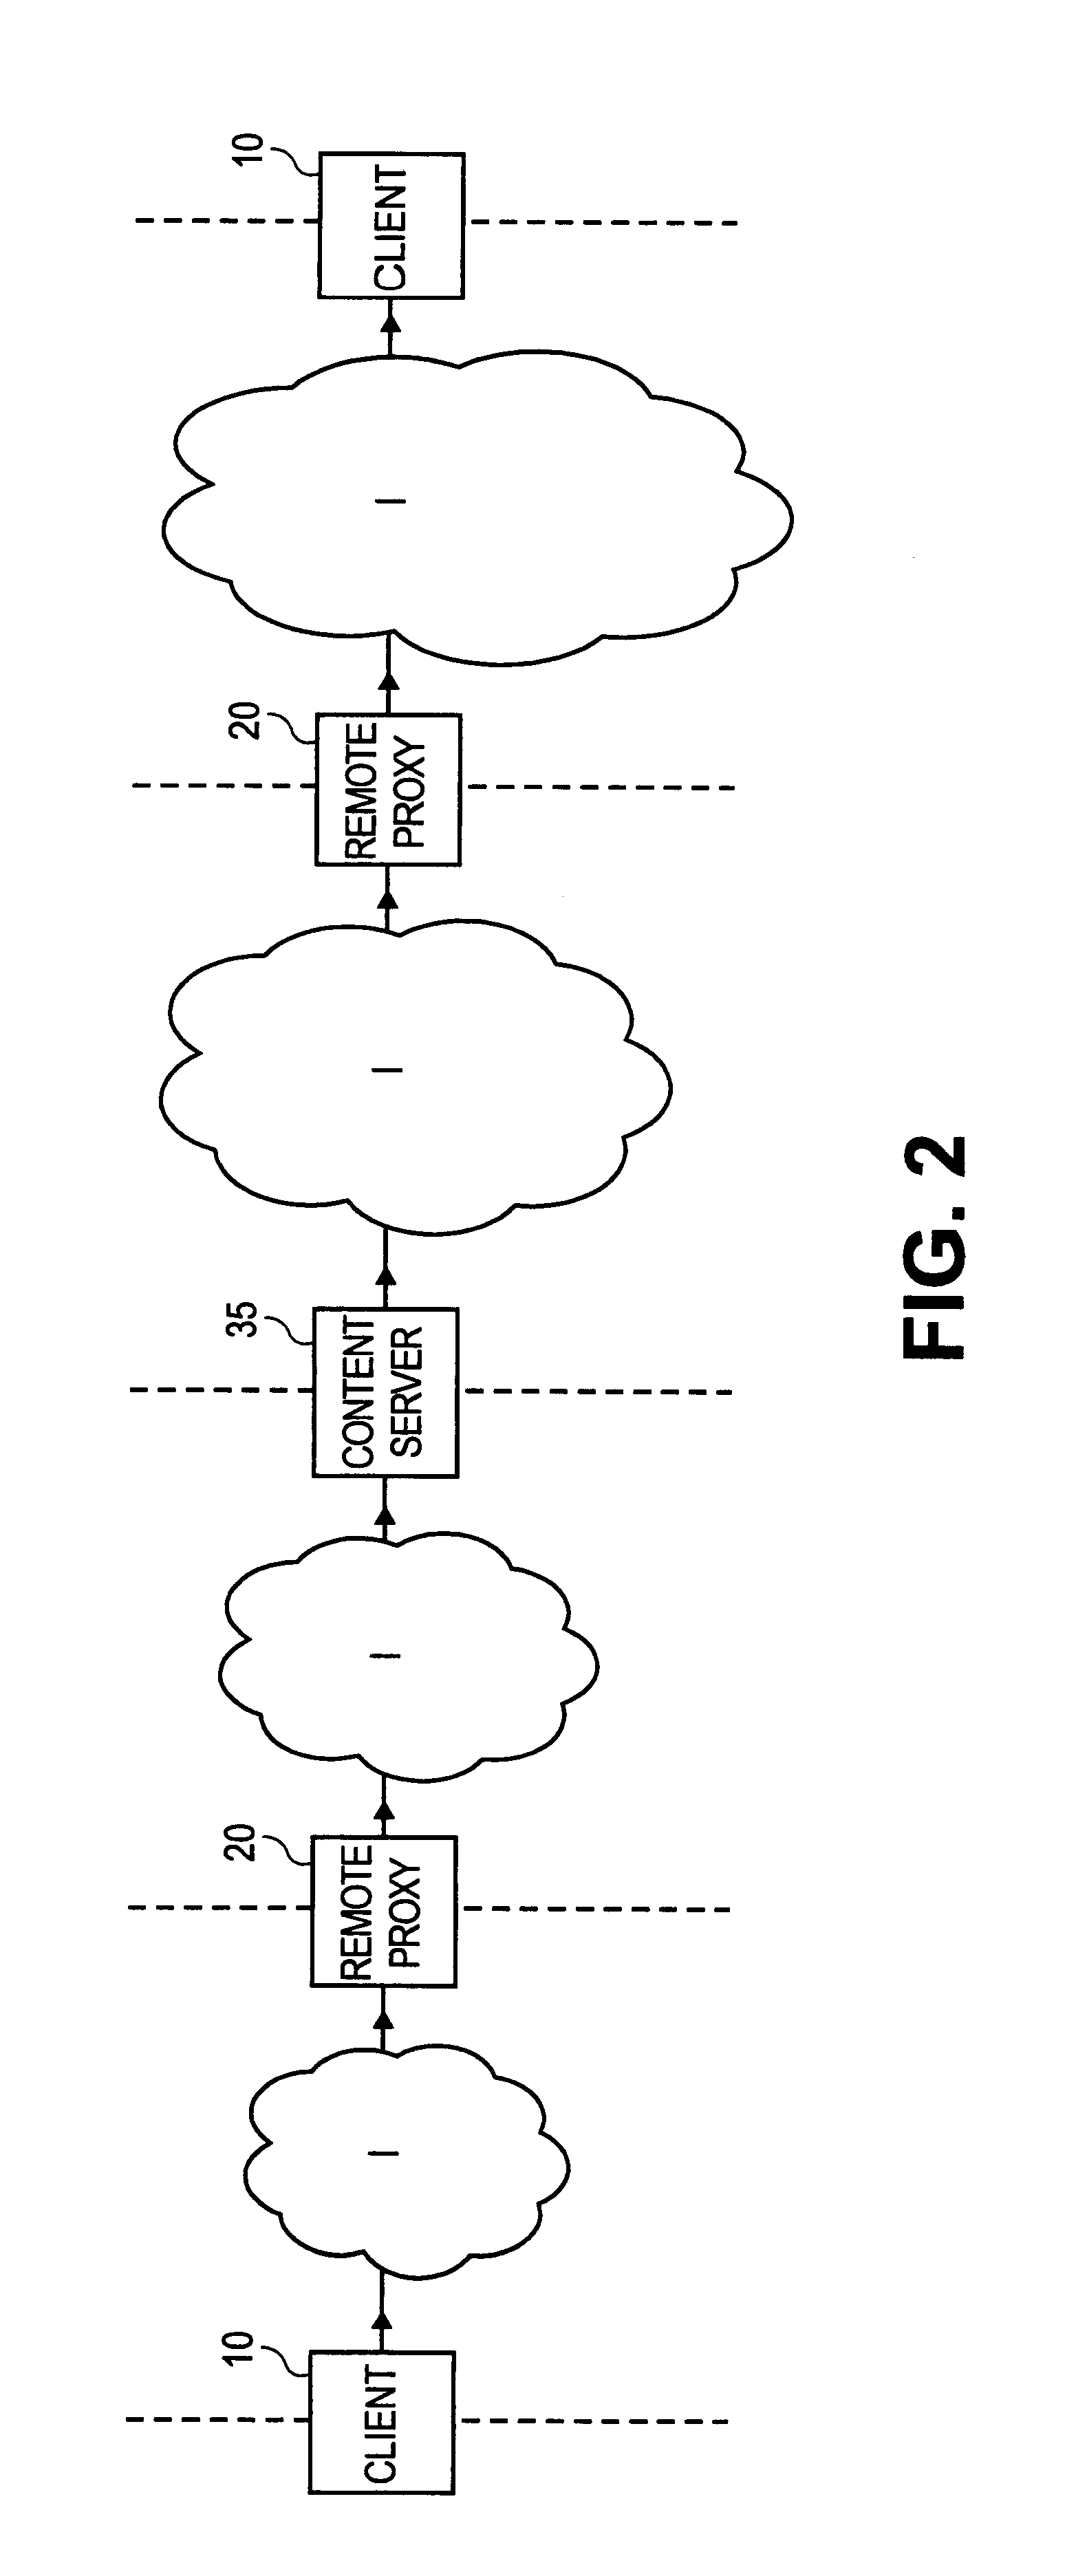 Method of proxy-assisted predictive pre-fetching with transcoding